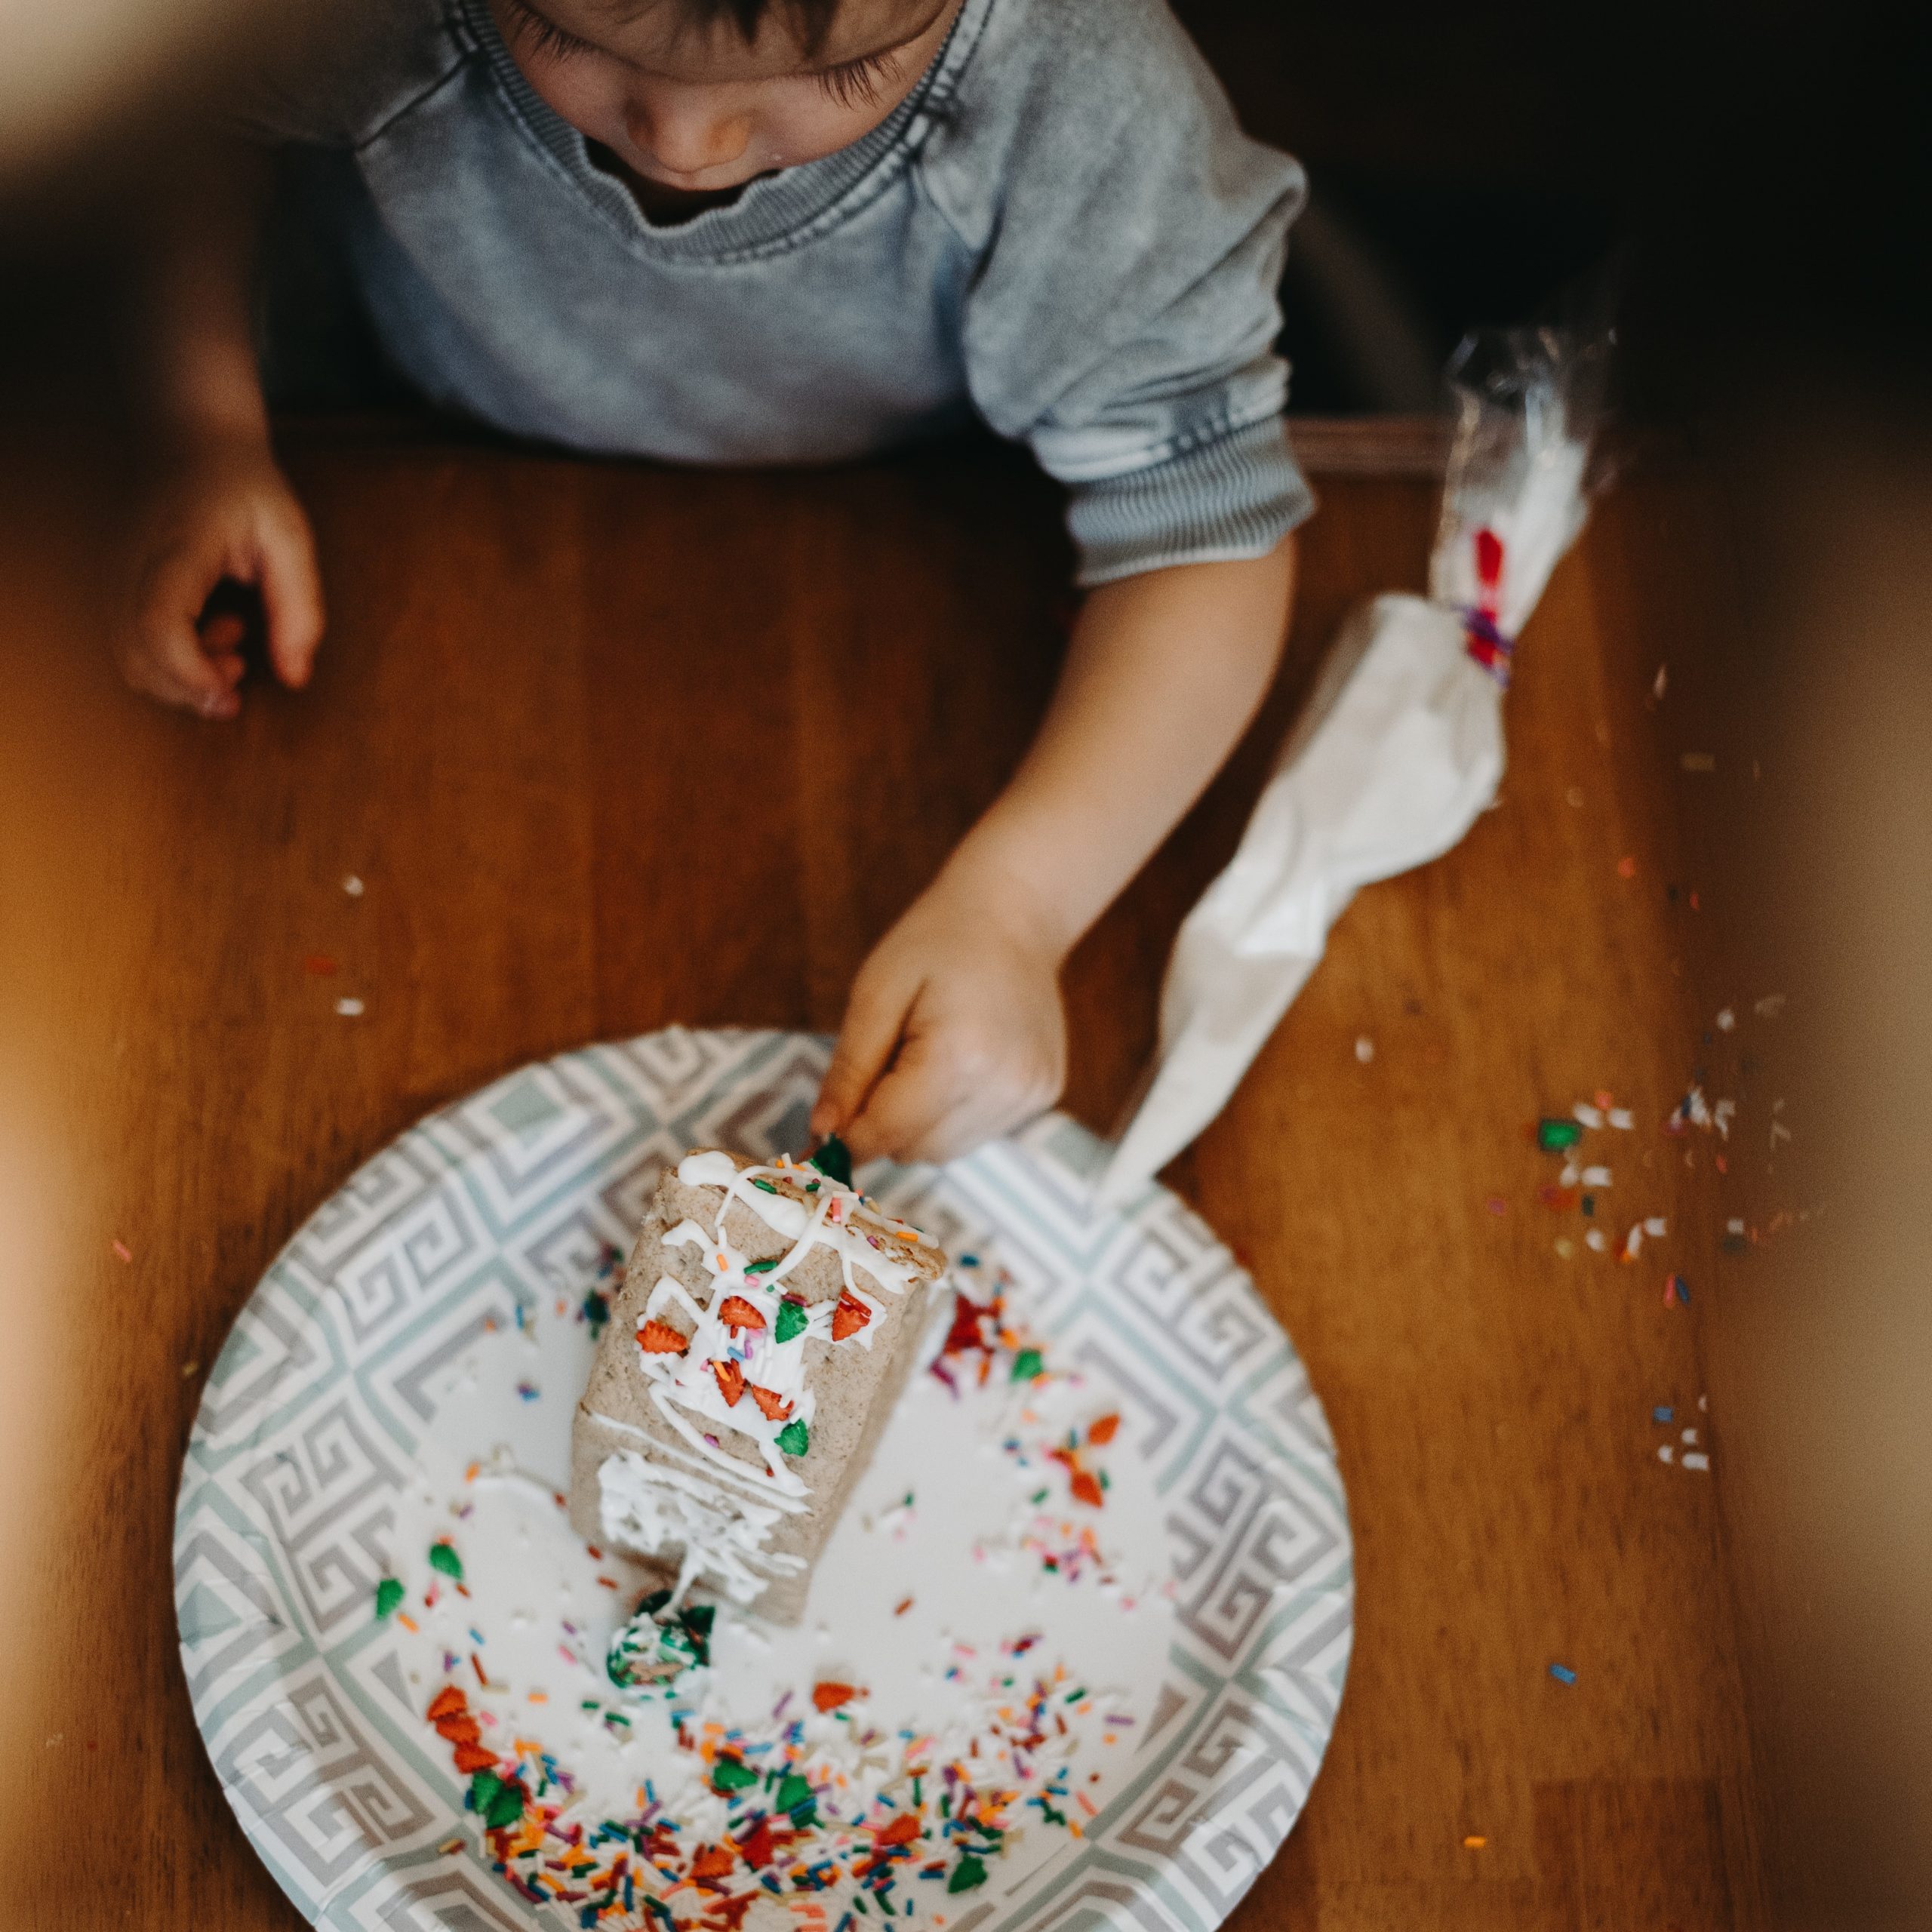 little boy decorating a cake with sprinkles and whipped cream